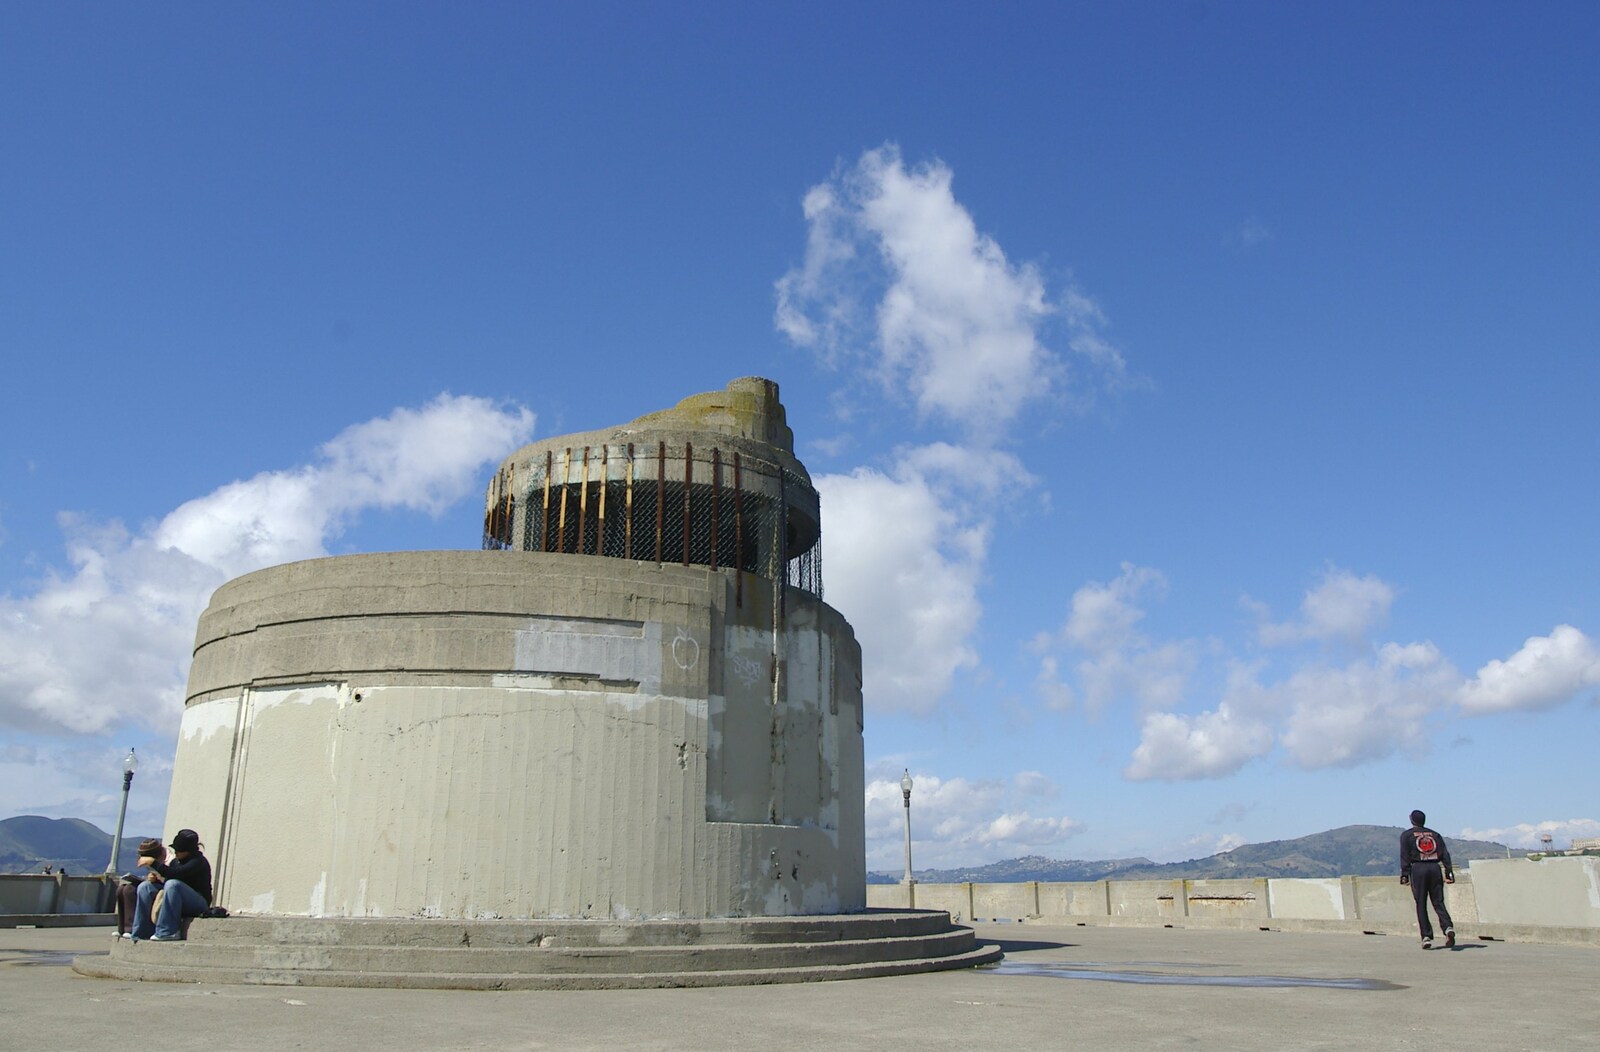 A Bauhaus-style concrete emplacement on the pier from The Golden Gate Bridge, San Francisco, California, US - 11th March 2006